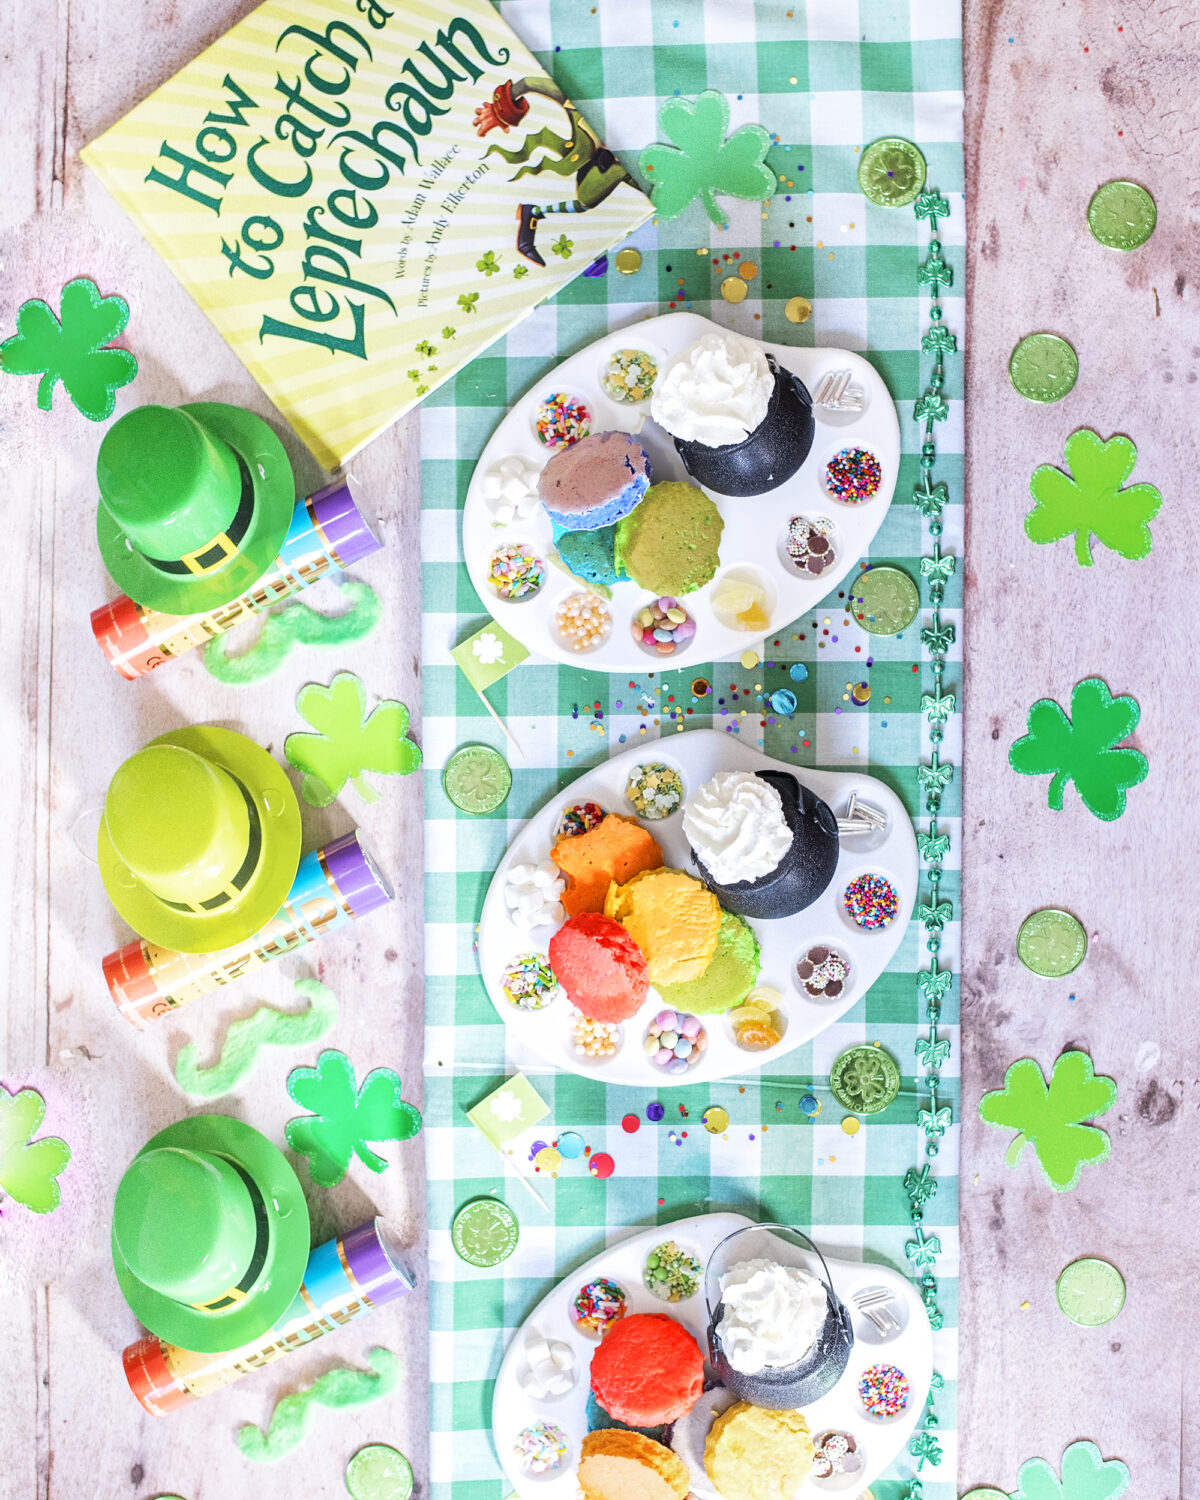 Host a St. Patrick's Day Party - Mini Rainbow Pancake bar for Breakfast with sprinkles and cream. Novelty St. Patrick's favours - rainbow confetti cannons and Mini Irish leprechaun hats. Leprechaun gold and green moustaches on the table